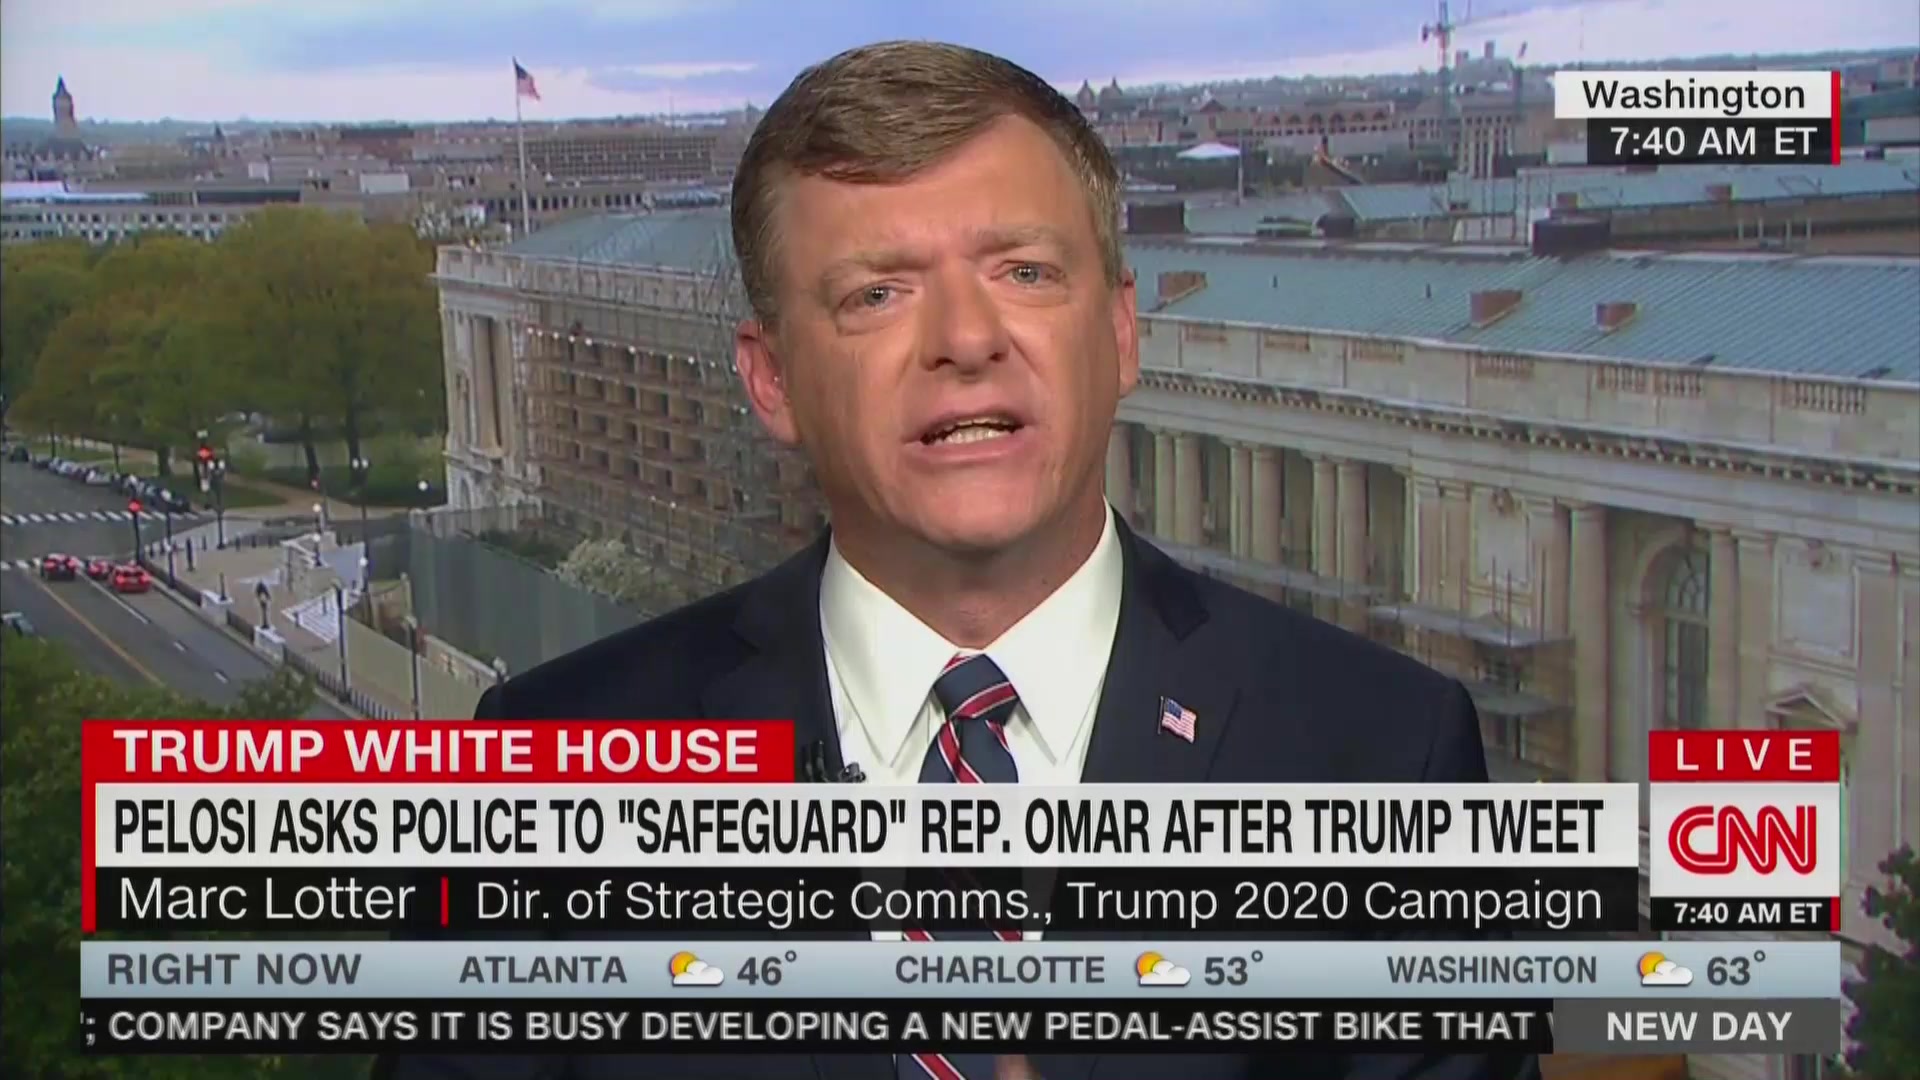 Trump Campaign Adviser: Ilhan Omar Is to Blame For Increase in Death Threats Against Her